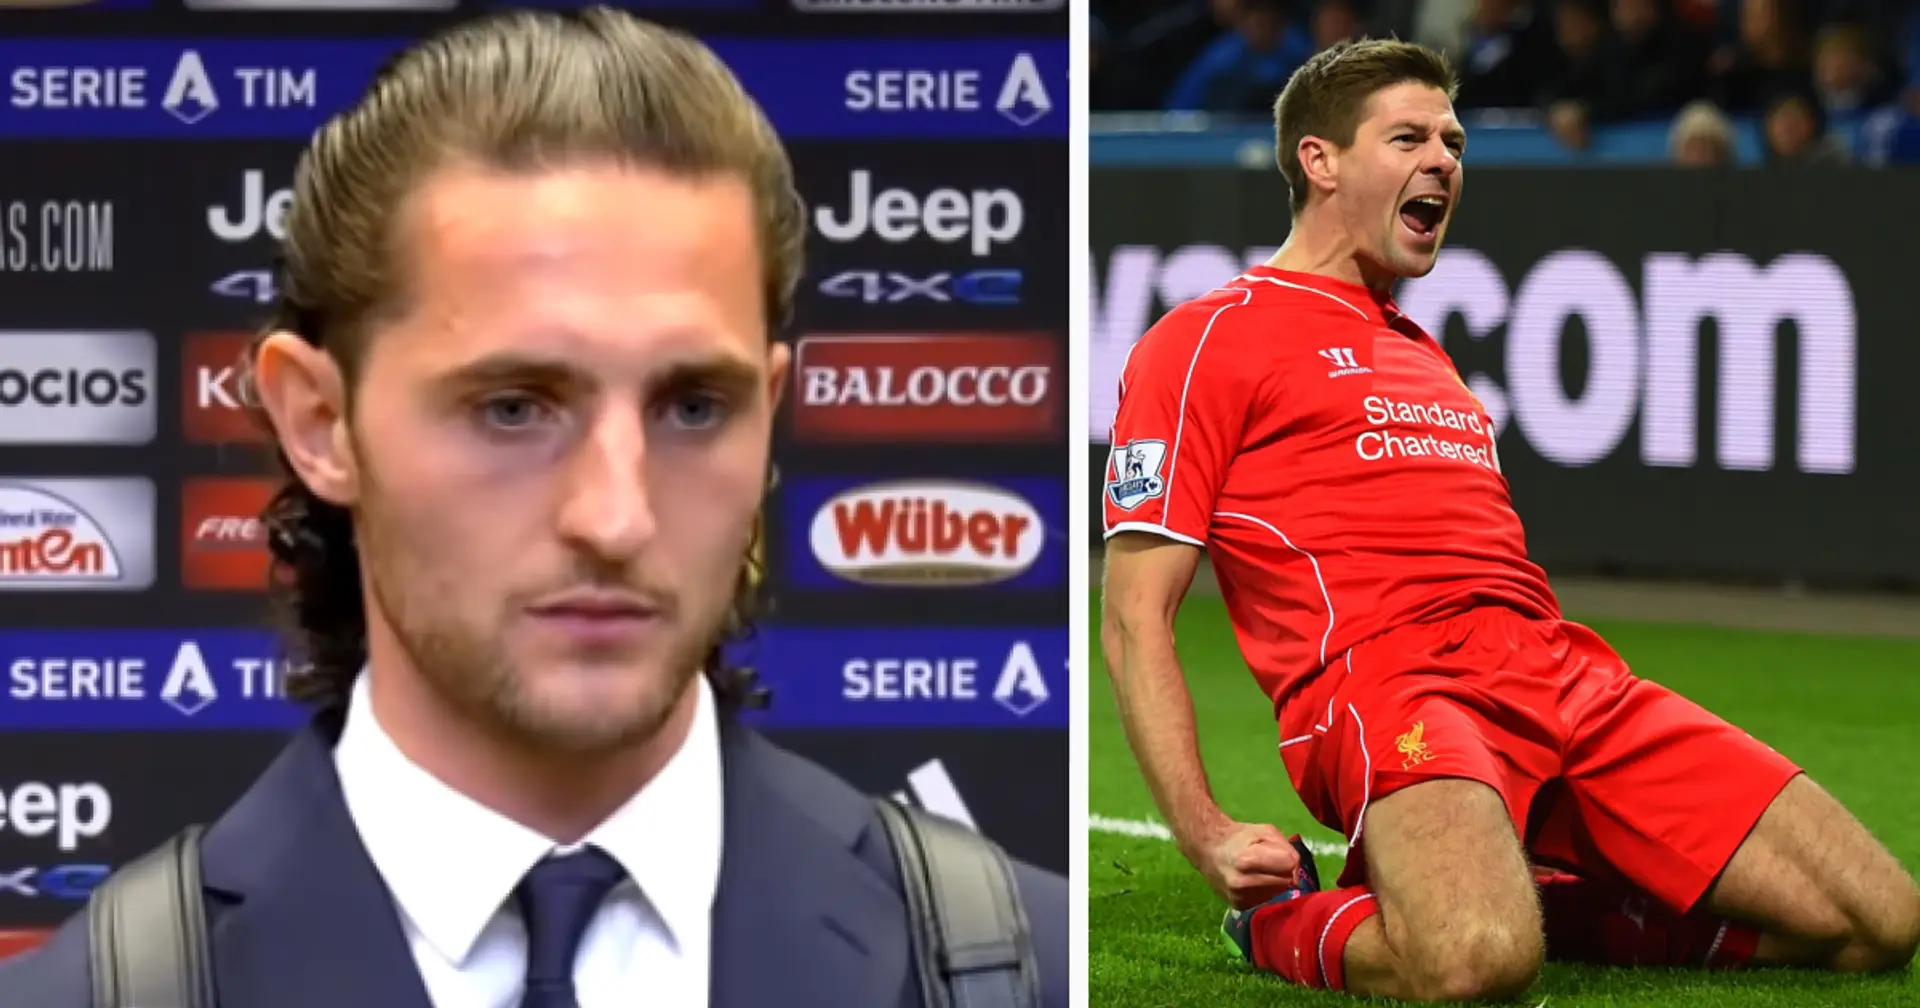 'I wanted to join': Juventus midfielder Rabiot opens up on love for Liverpool 